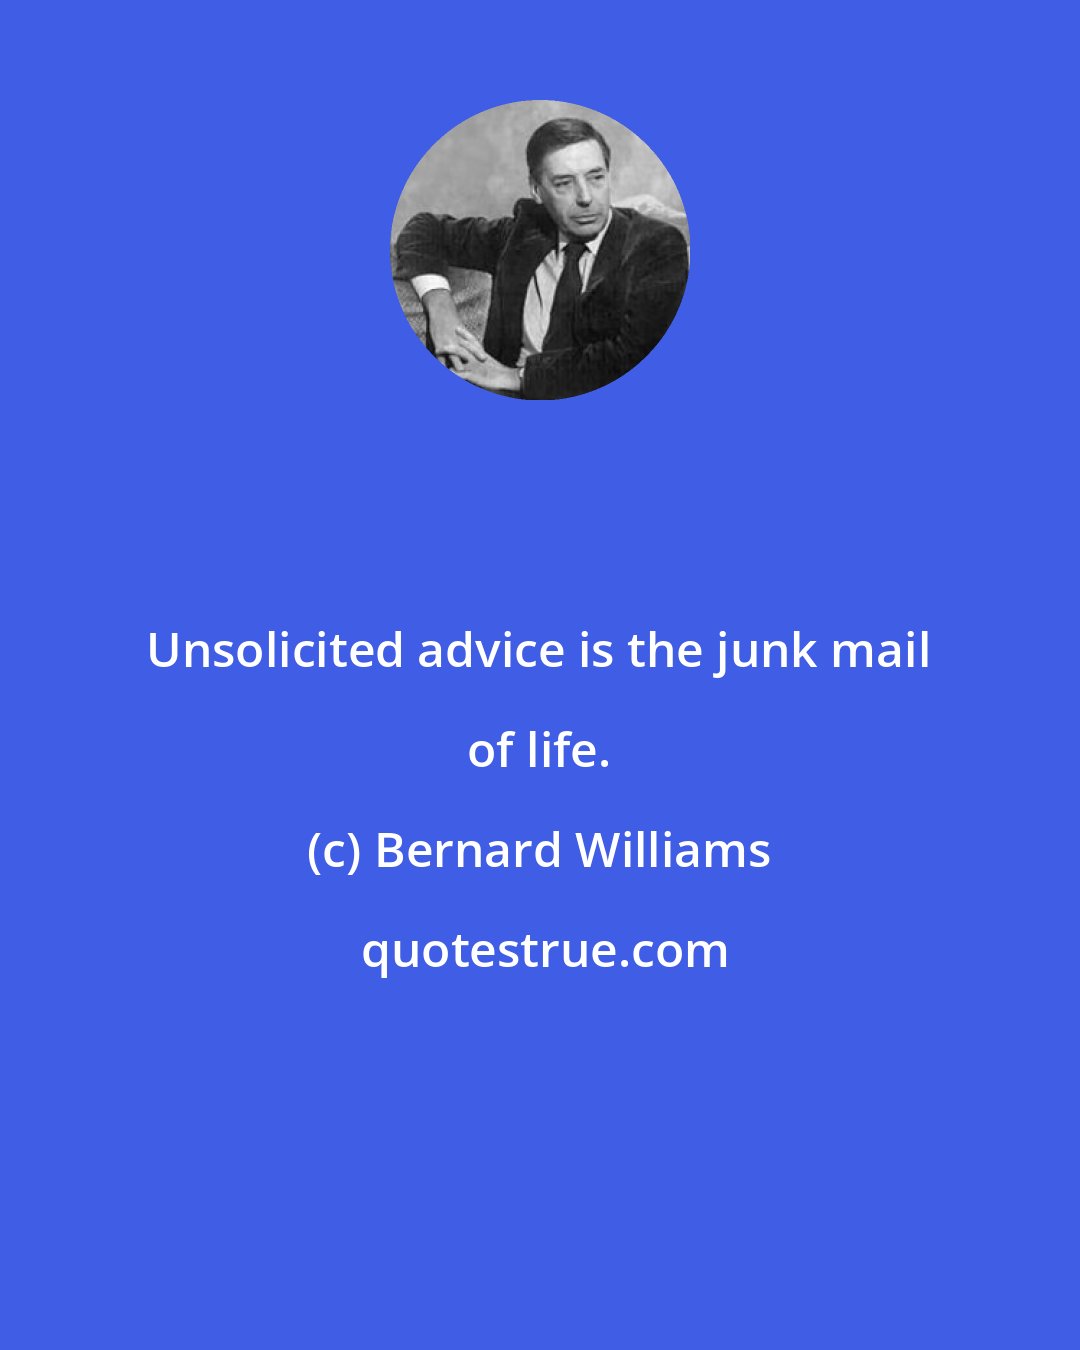 Bernard Williams: Unsolicited advice is the junk mail of life.